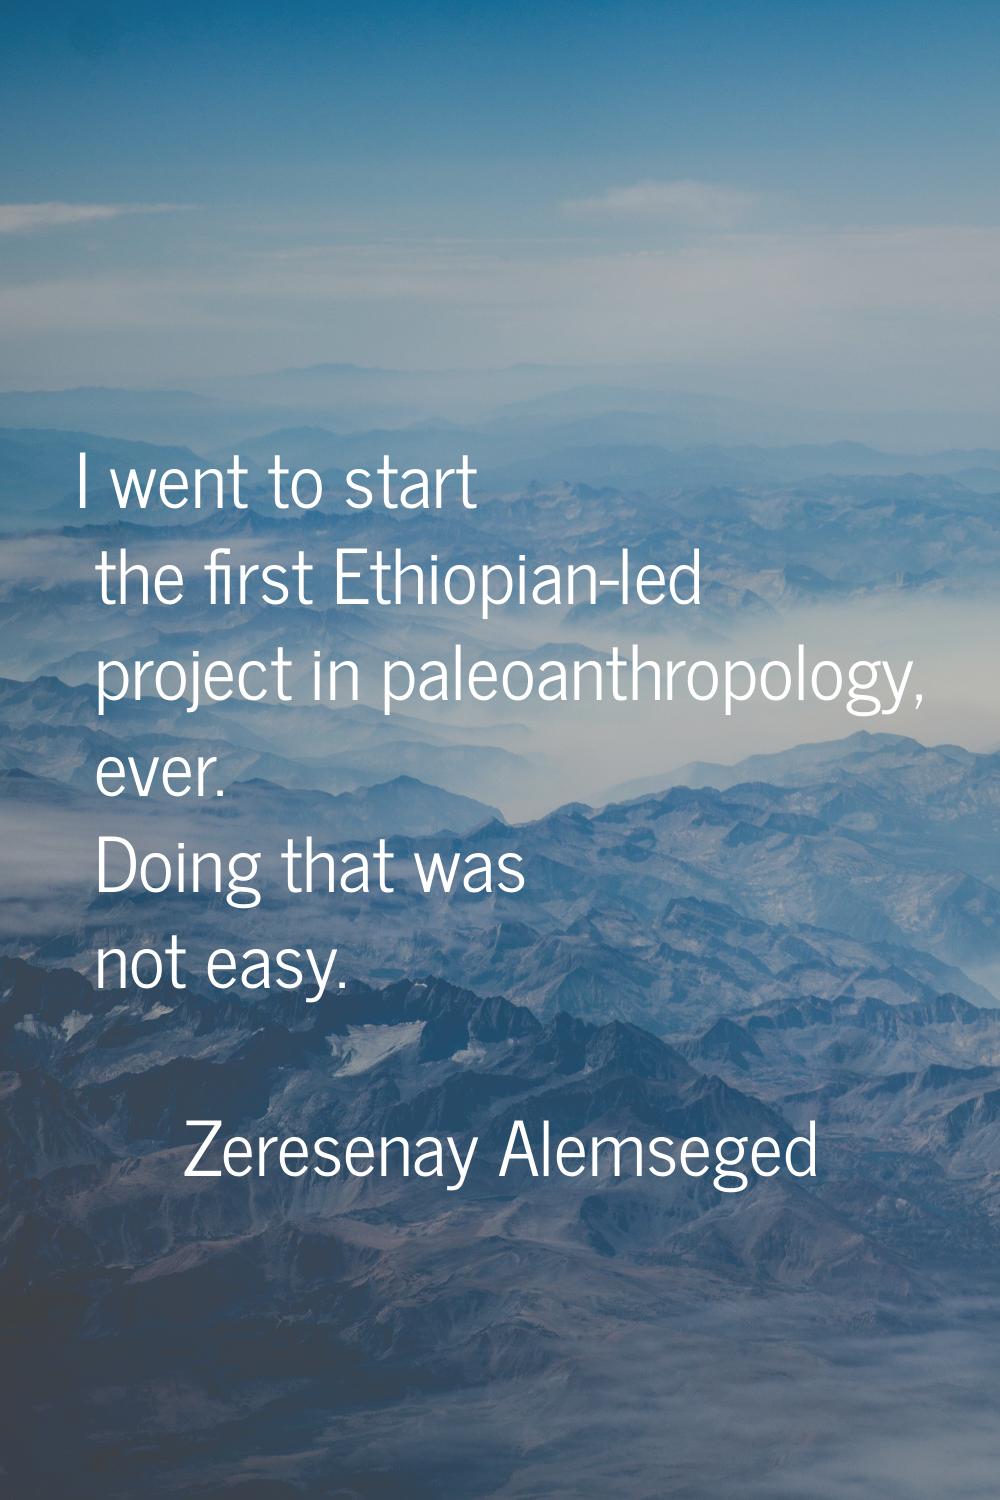 I went to start the first Ethiopian-led project in paleoanthropology, ever. Doing that was not easy